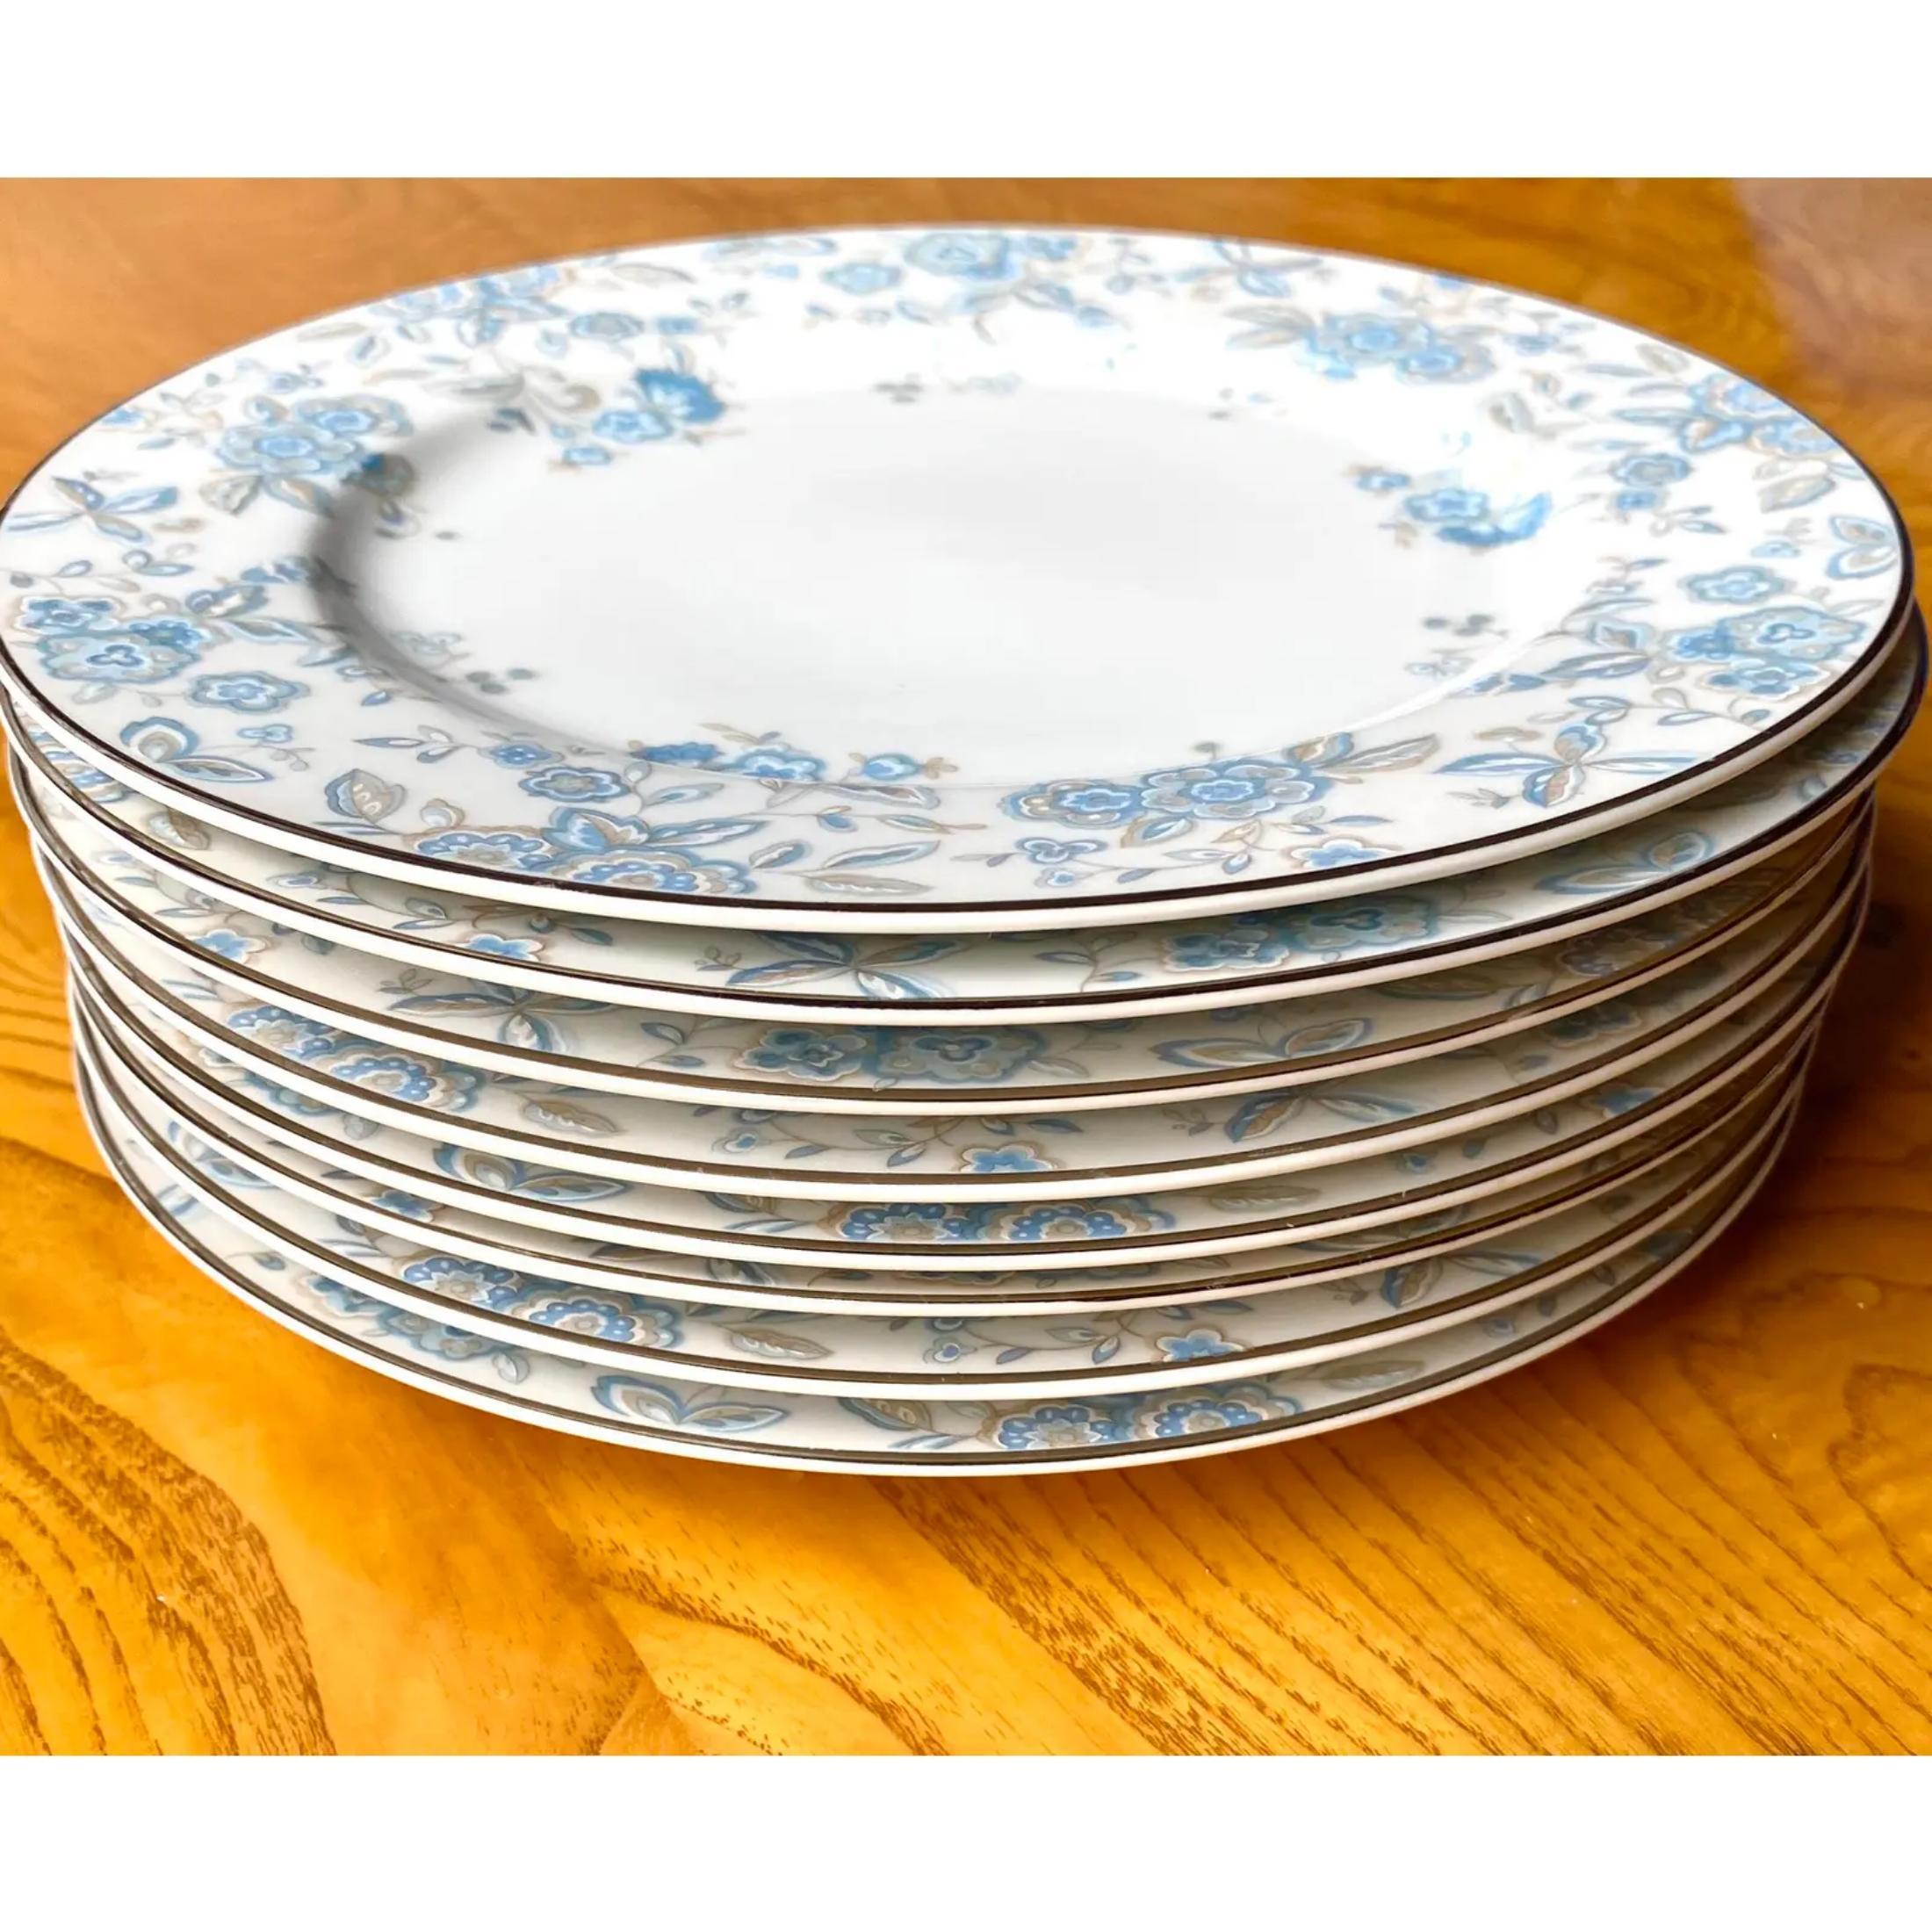 Beautiful set of Vintage Towne chine. The prettiest floating blue flower pattern with a silver rim.
8 dinner plates
8 salad plates
8 soup bowls
8 bread plates